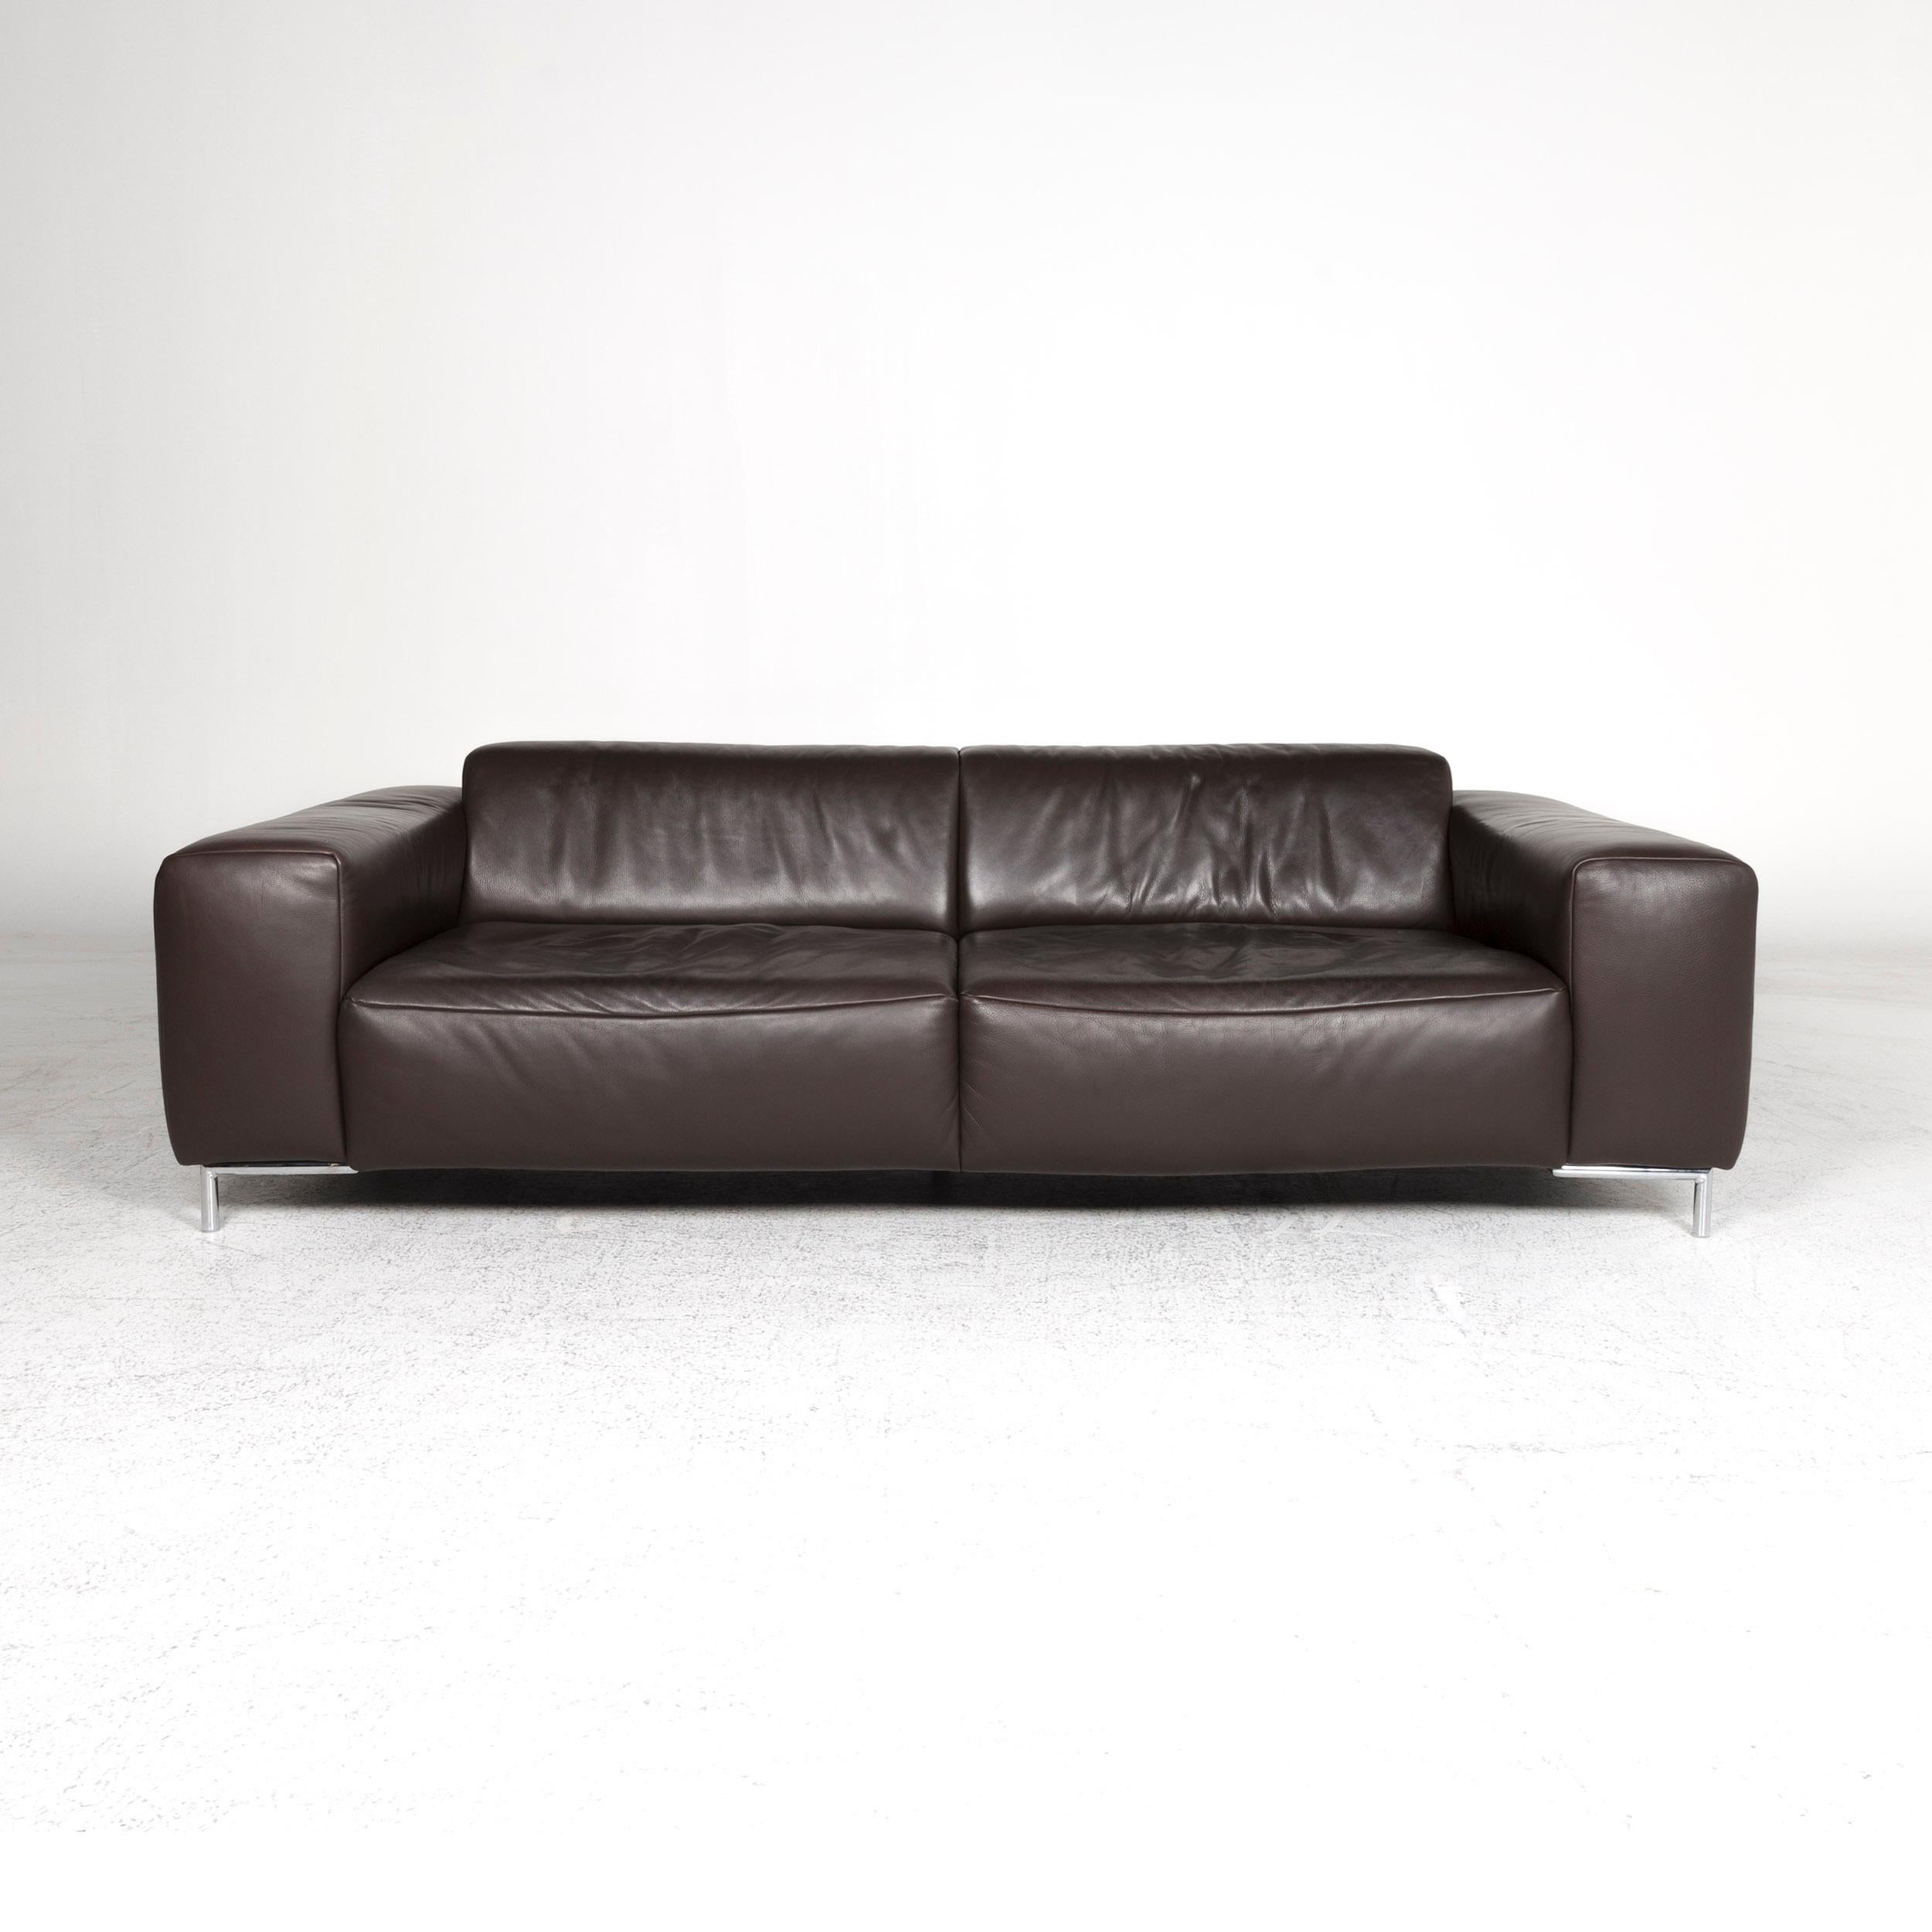 We bring to you a Koinor leather sofa brown three-seat couch.

 
 Product measurements in centimeters:
 
 Depth 114
Width 240
Height 69
Seat-height 40
Rest-height 59
Seat-depth 80
Seat-width 181
Back-height 30.